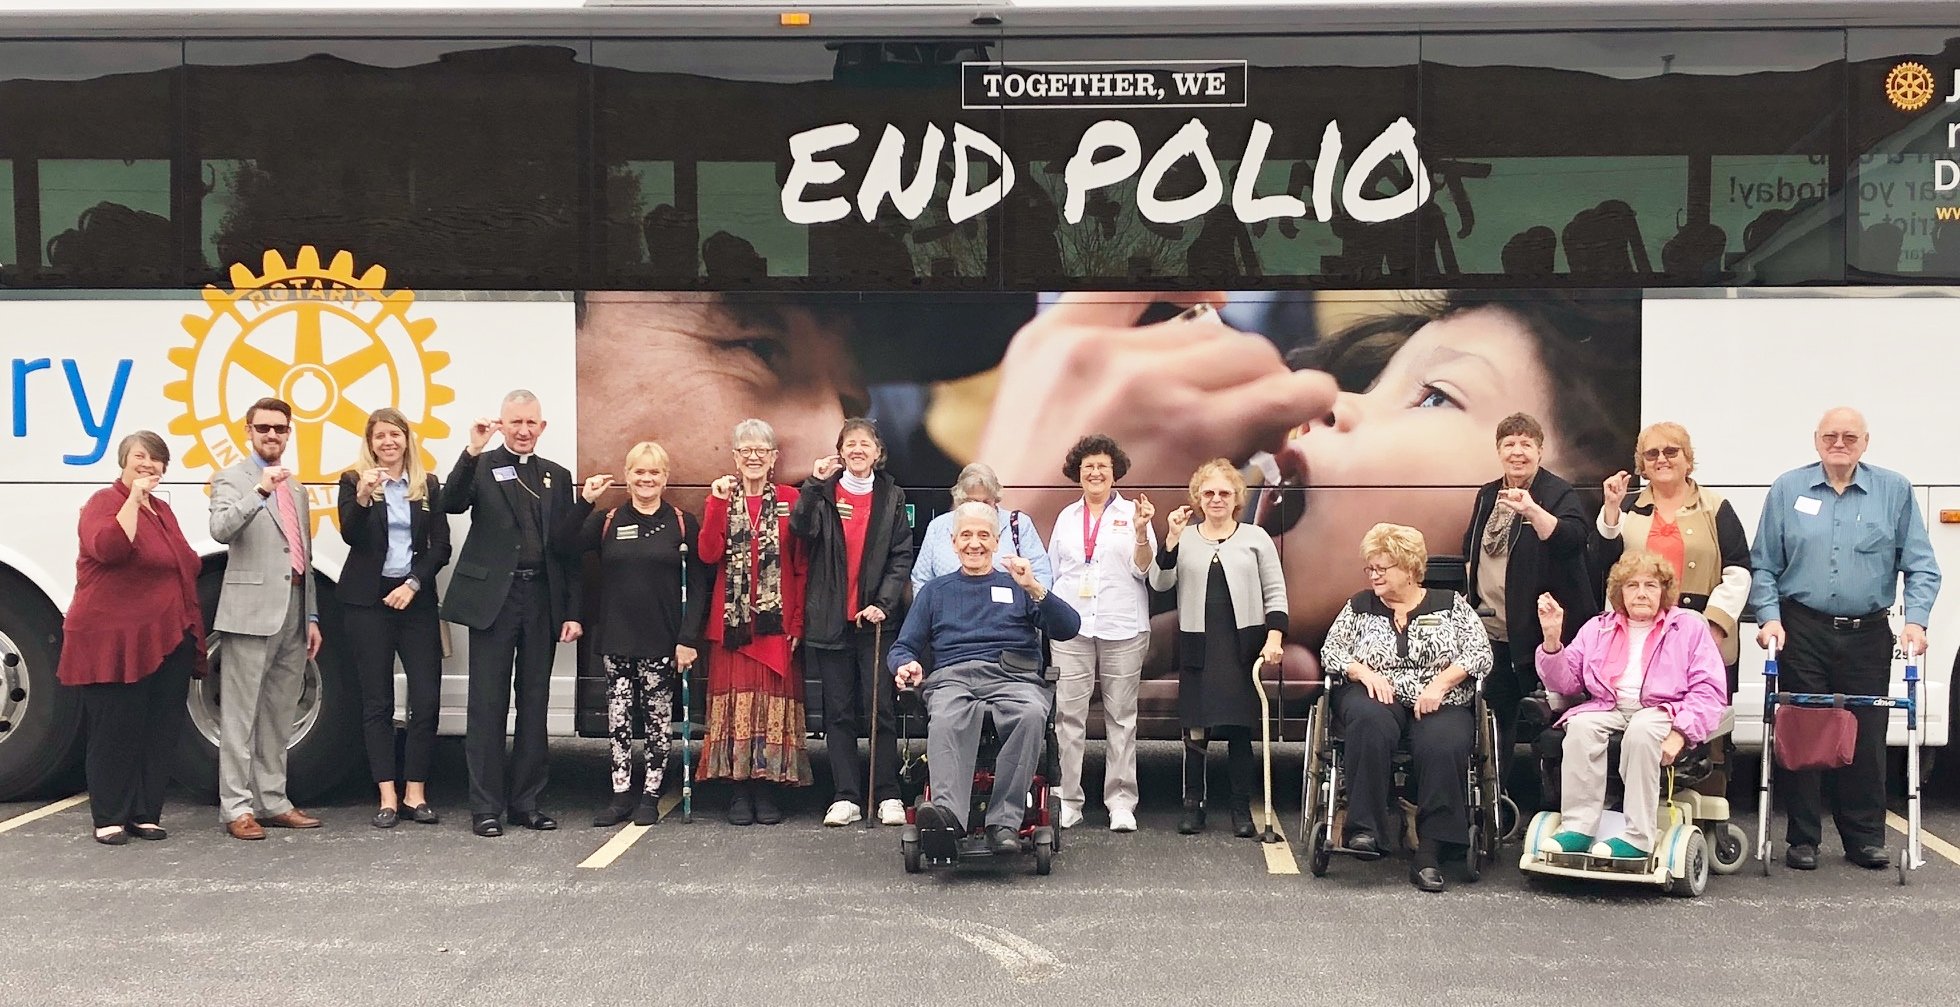  Polio Survivors and Rotarians in Hanover, PA honoring World Polio Day with a special Bus, 2019 